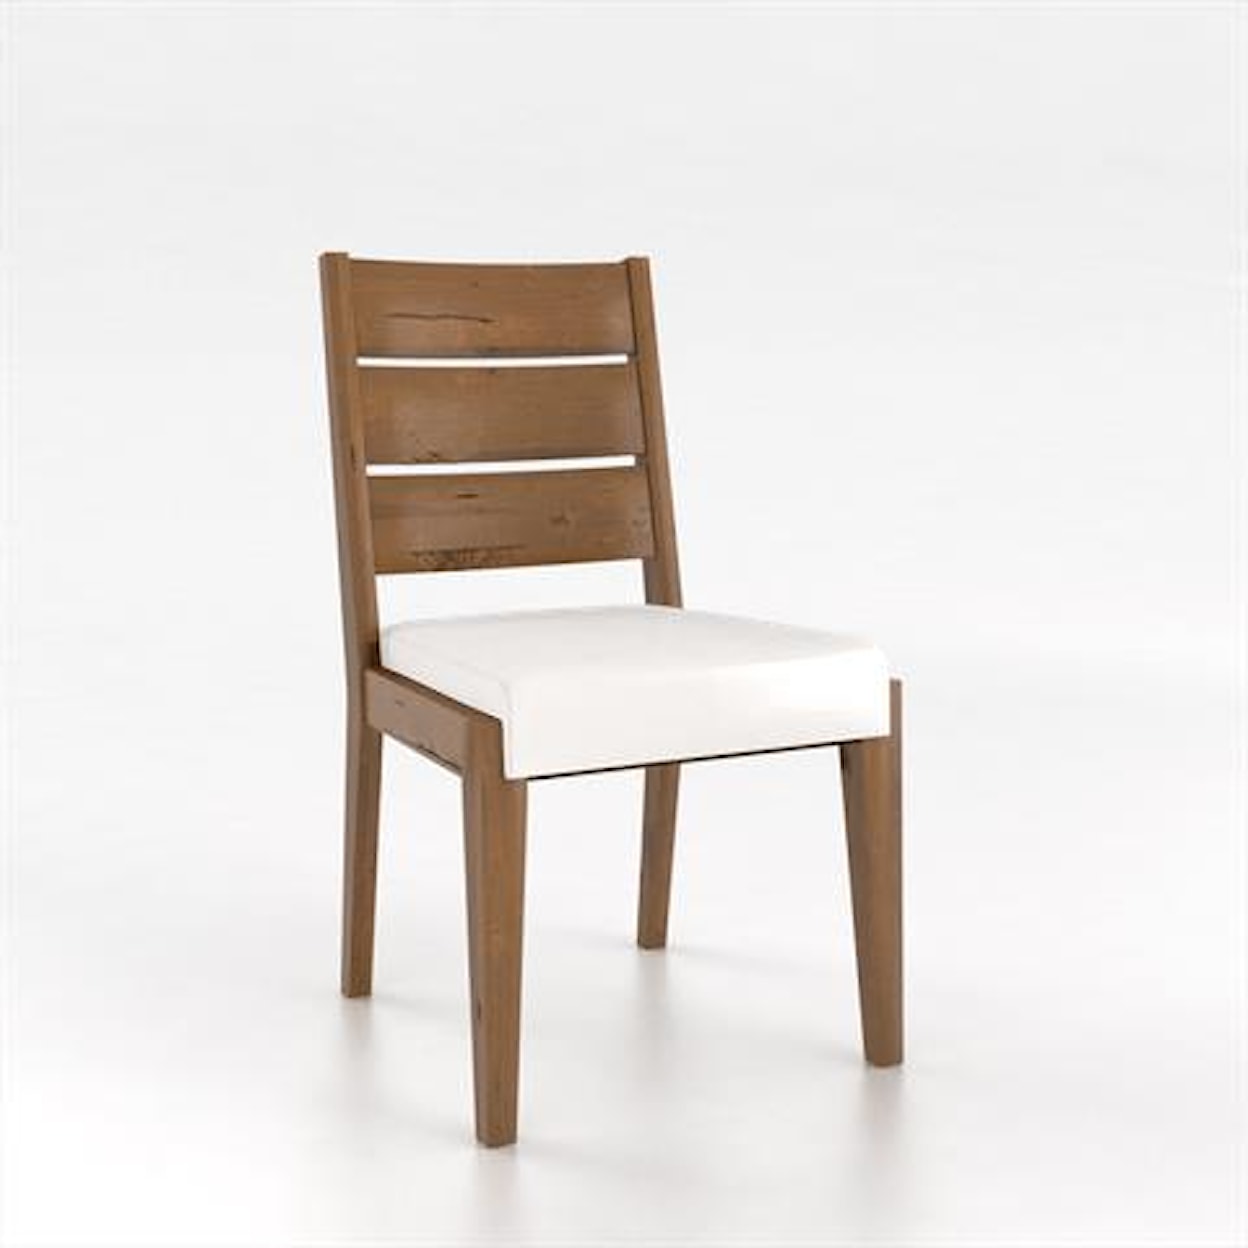 Canadel Loft Customizable Upholstered Side Chair